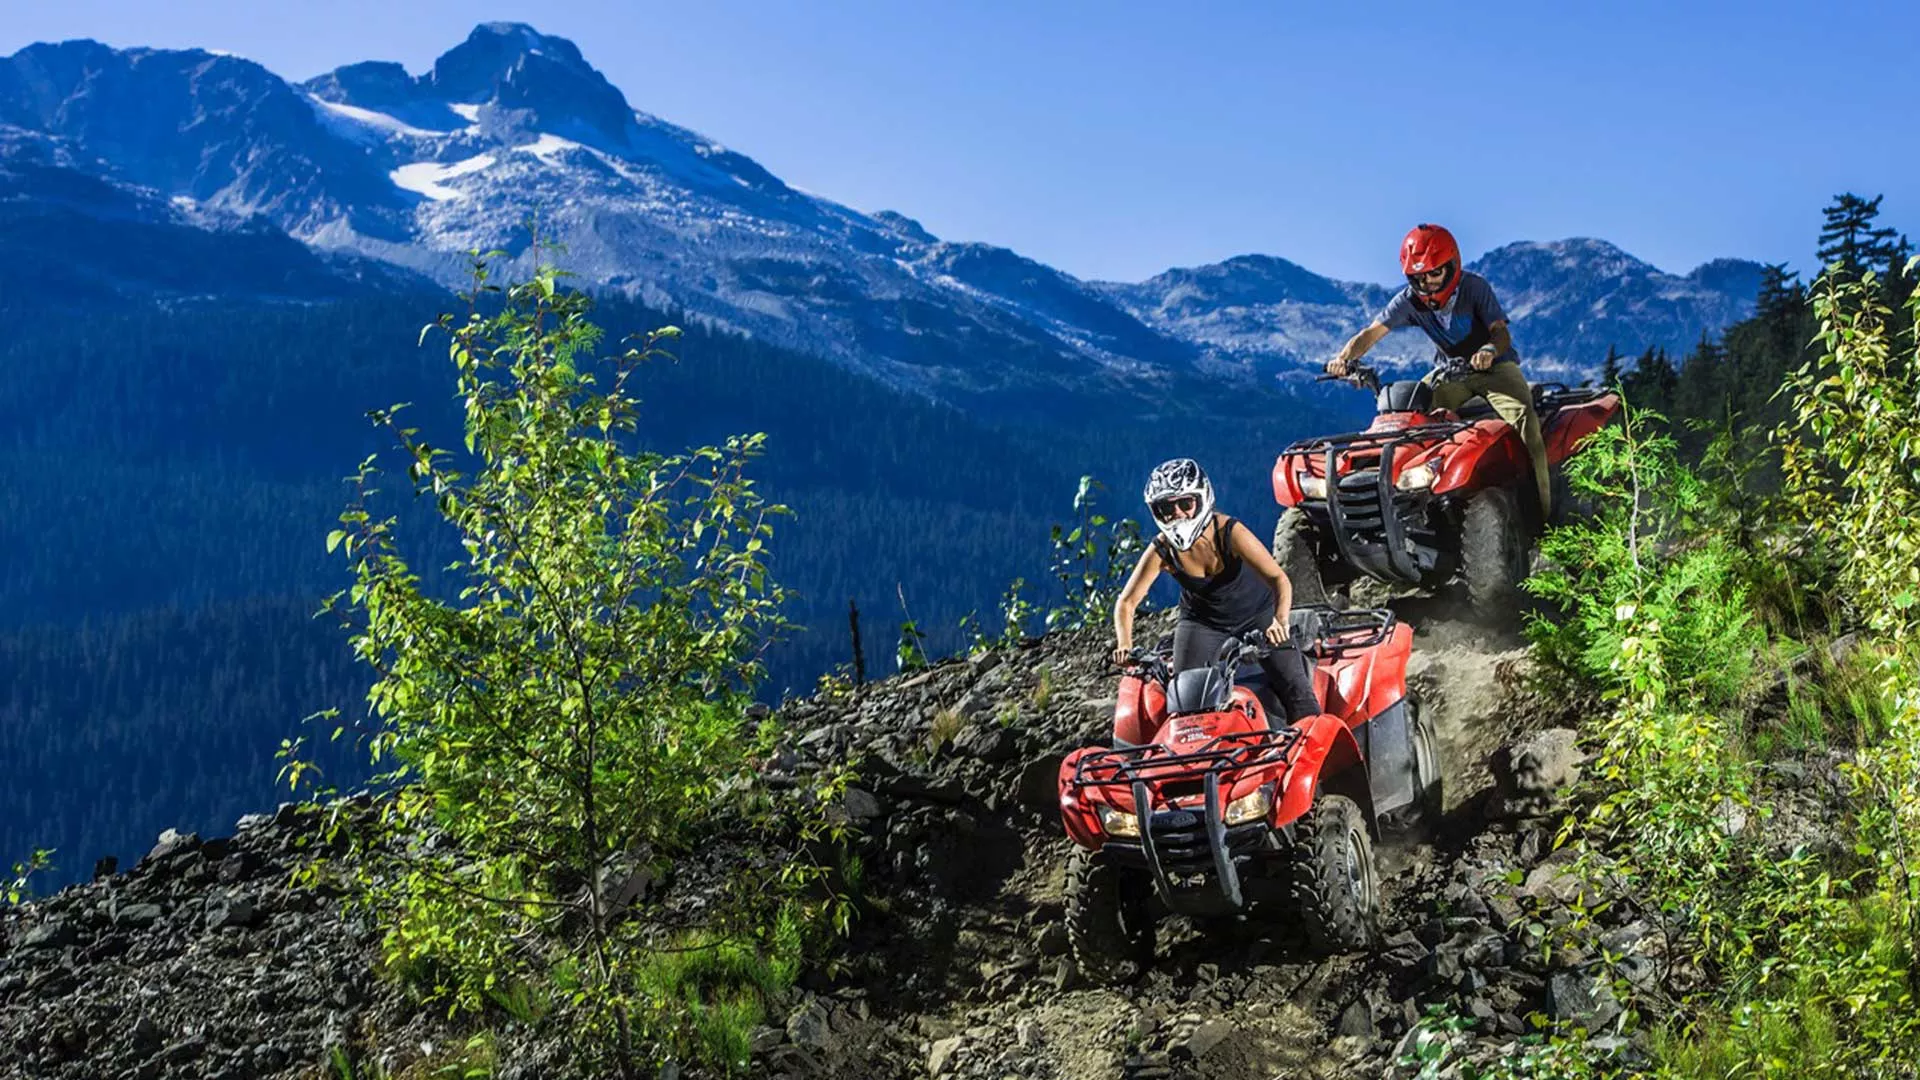 Whistler ATV Bushwacker Tour in Canada, North America | ATVs - Rated 4.5